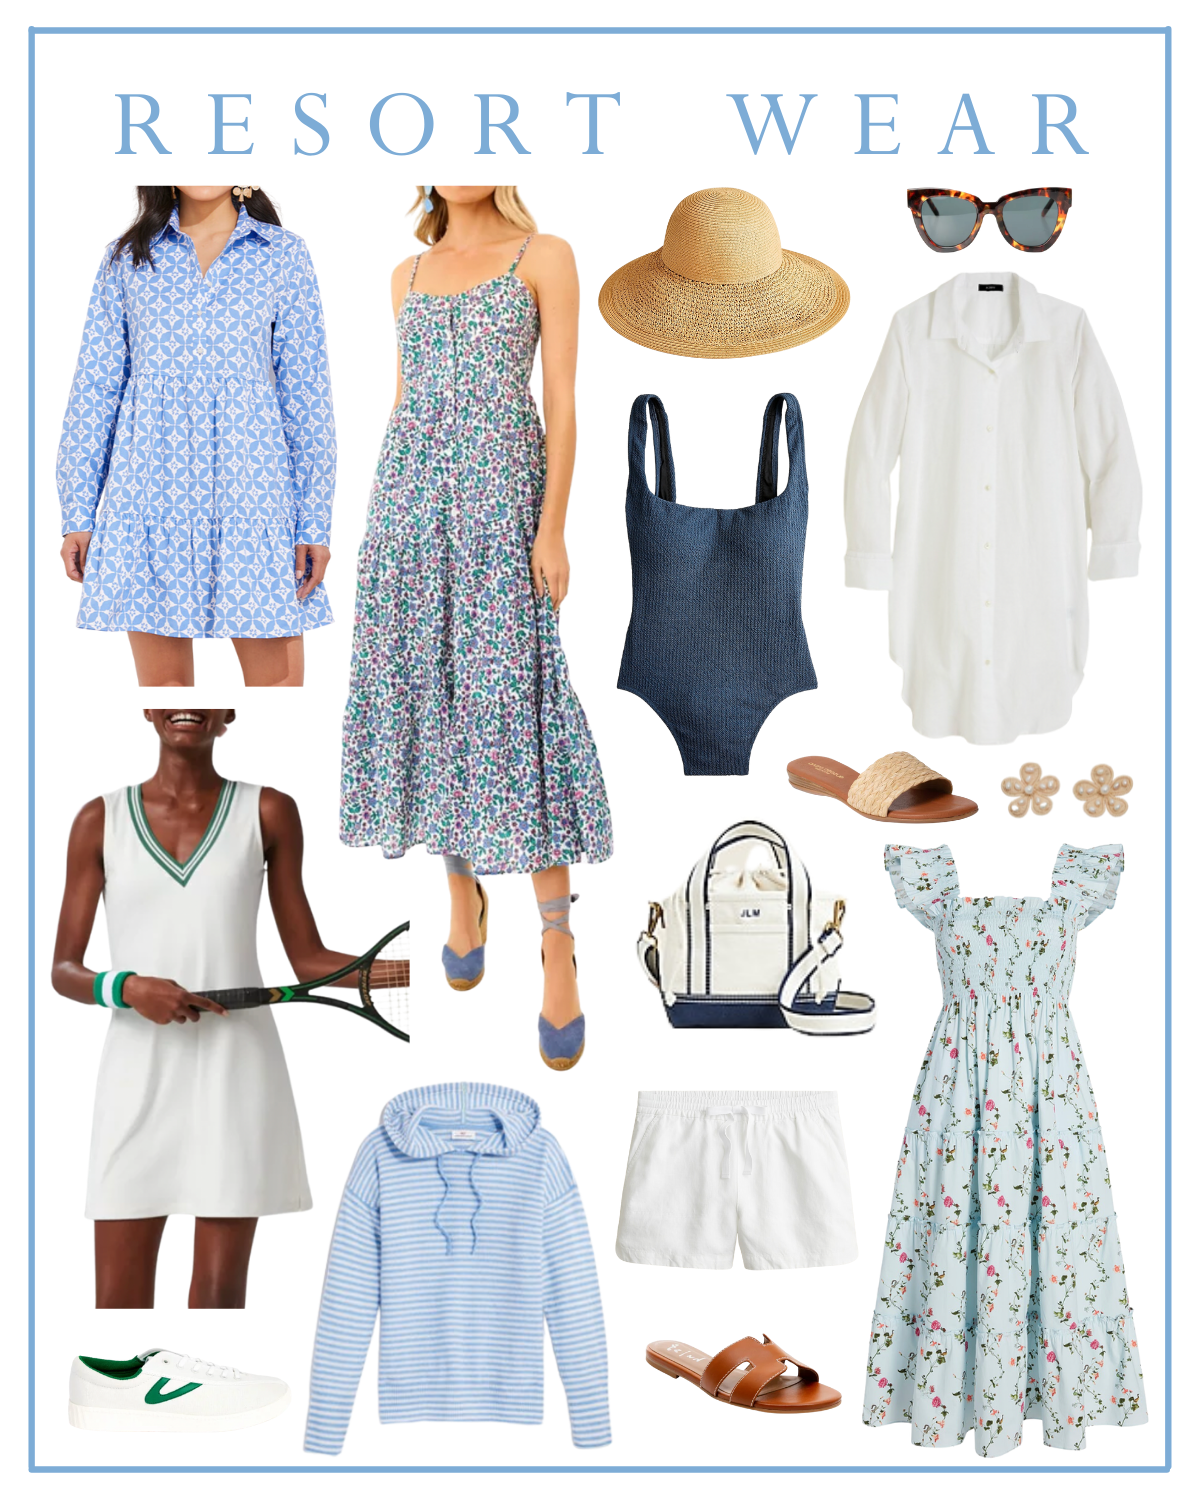 Resort Wear Finds for Your Next Vacation - 50 IS NOT OLD - A Fashion And  Beauty Blog For Women Over 50